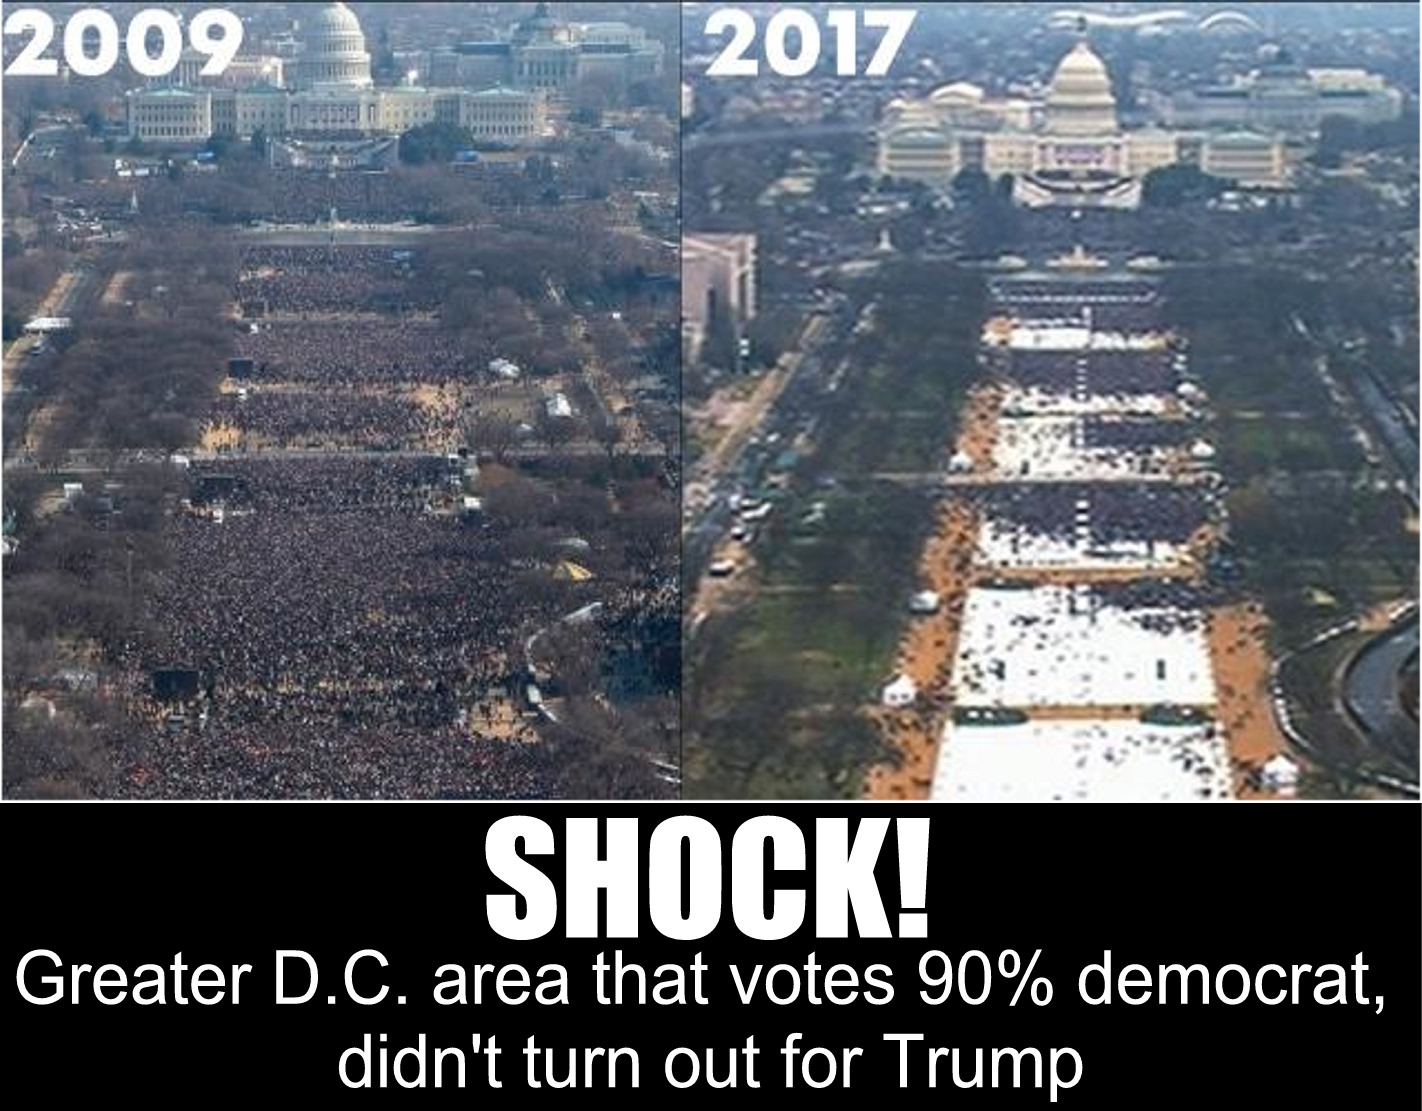 national mall - 2009, 2017 00012 Pe Shock! Greater D.C. area that votes 90% democrat, didn't turn out for Trump